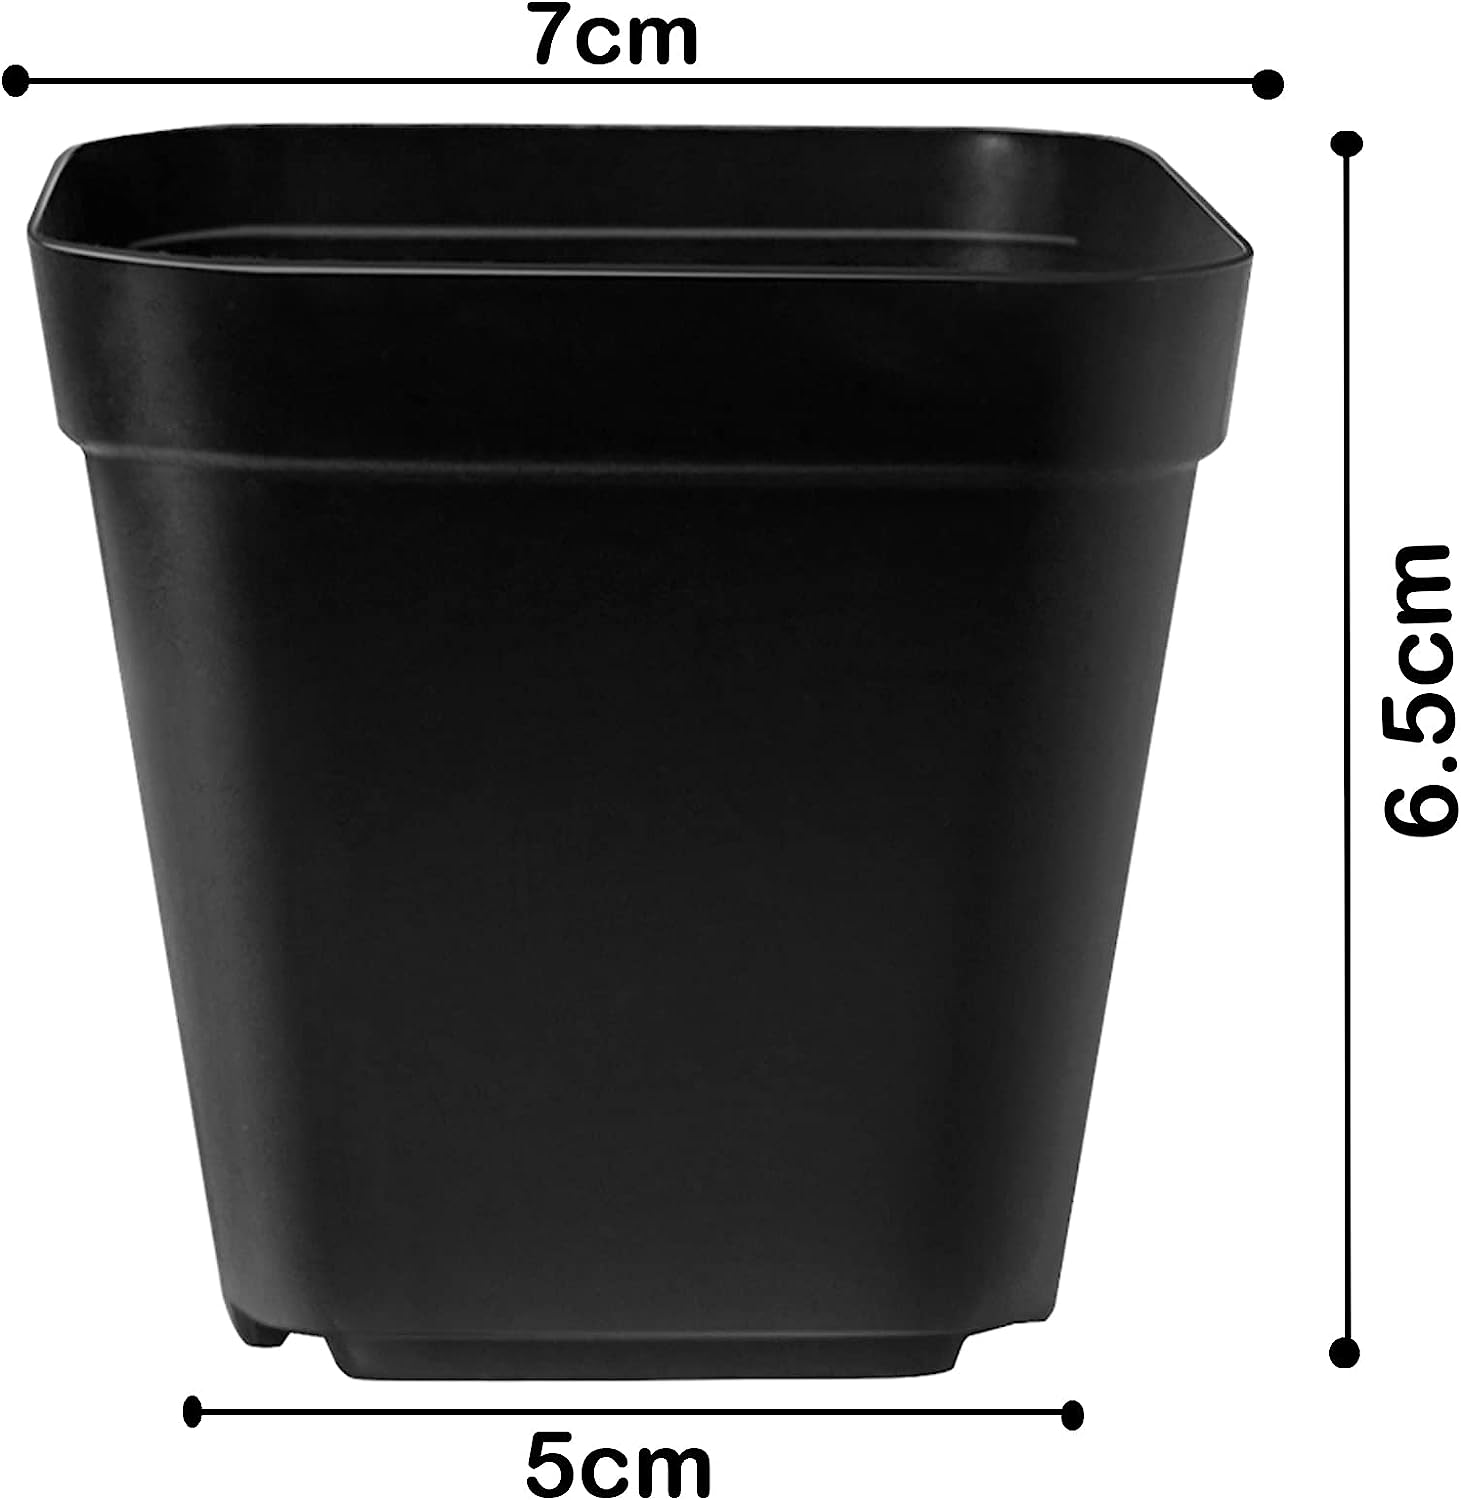 Pots for Seed Starting/Cuttings, 7cm 20pcs Plastic Square Plant Nursery Pots,Seed Pot Flower Plant Container for Fruit, Vegetable, Plant, Succulents, Seedlings, Cuttings, Transplanting